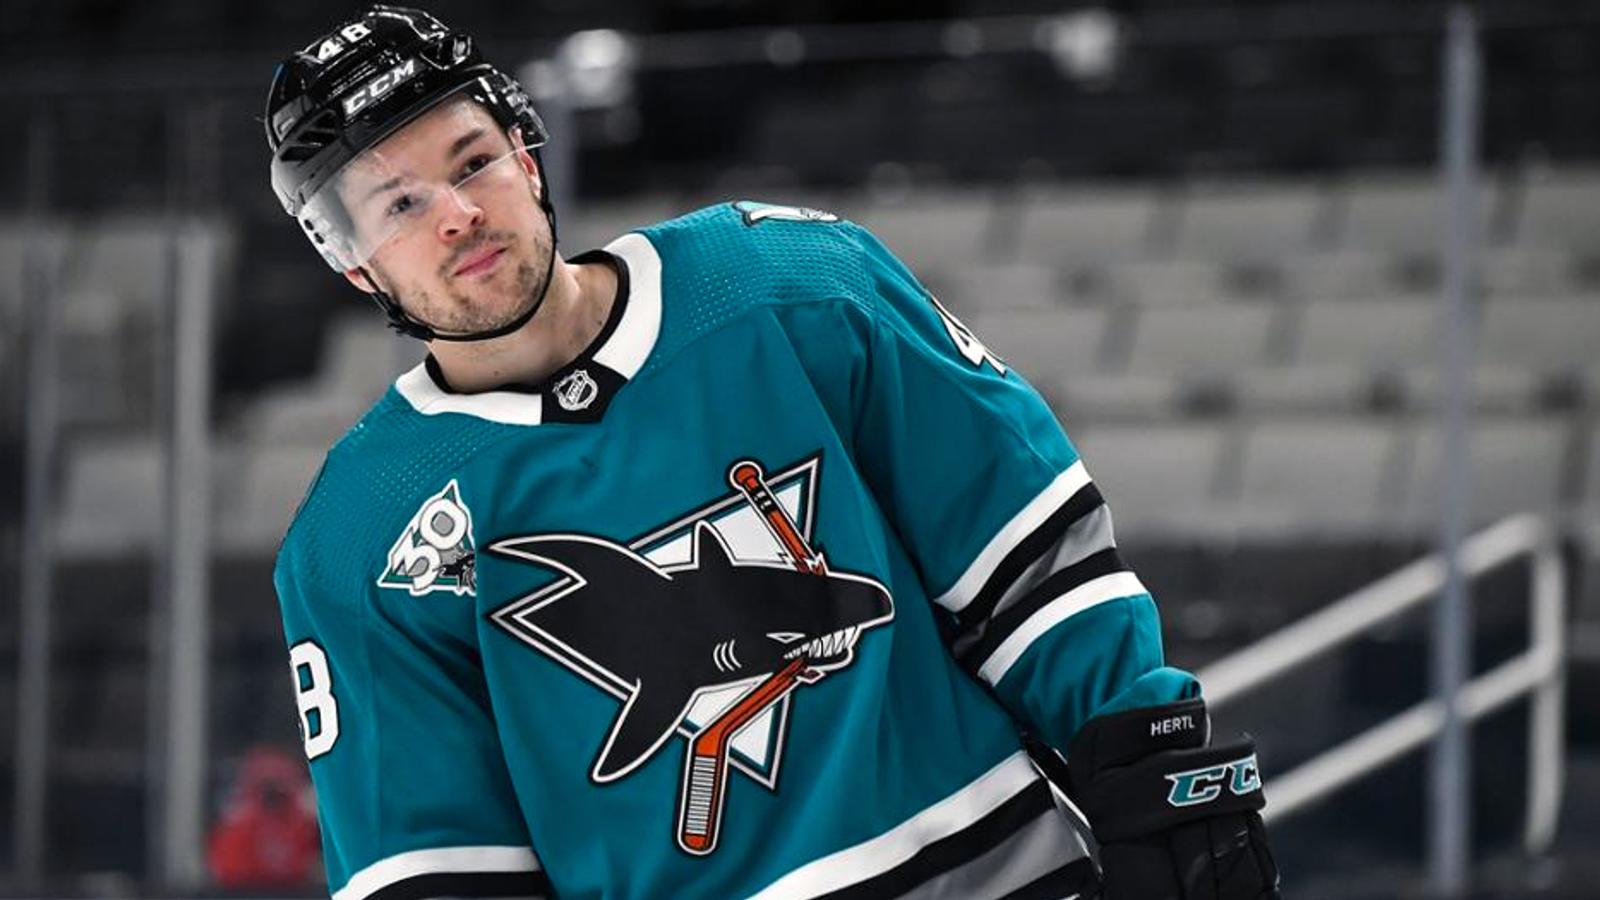 Report: Sharks and Rangers linked in trade talks